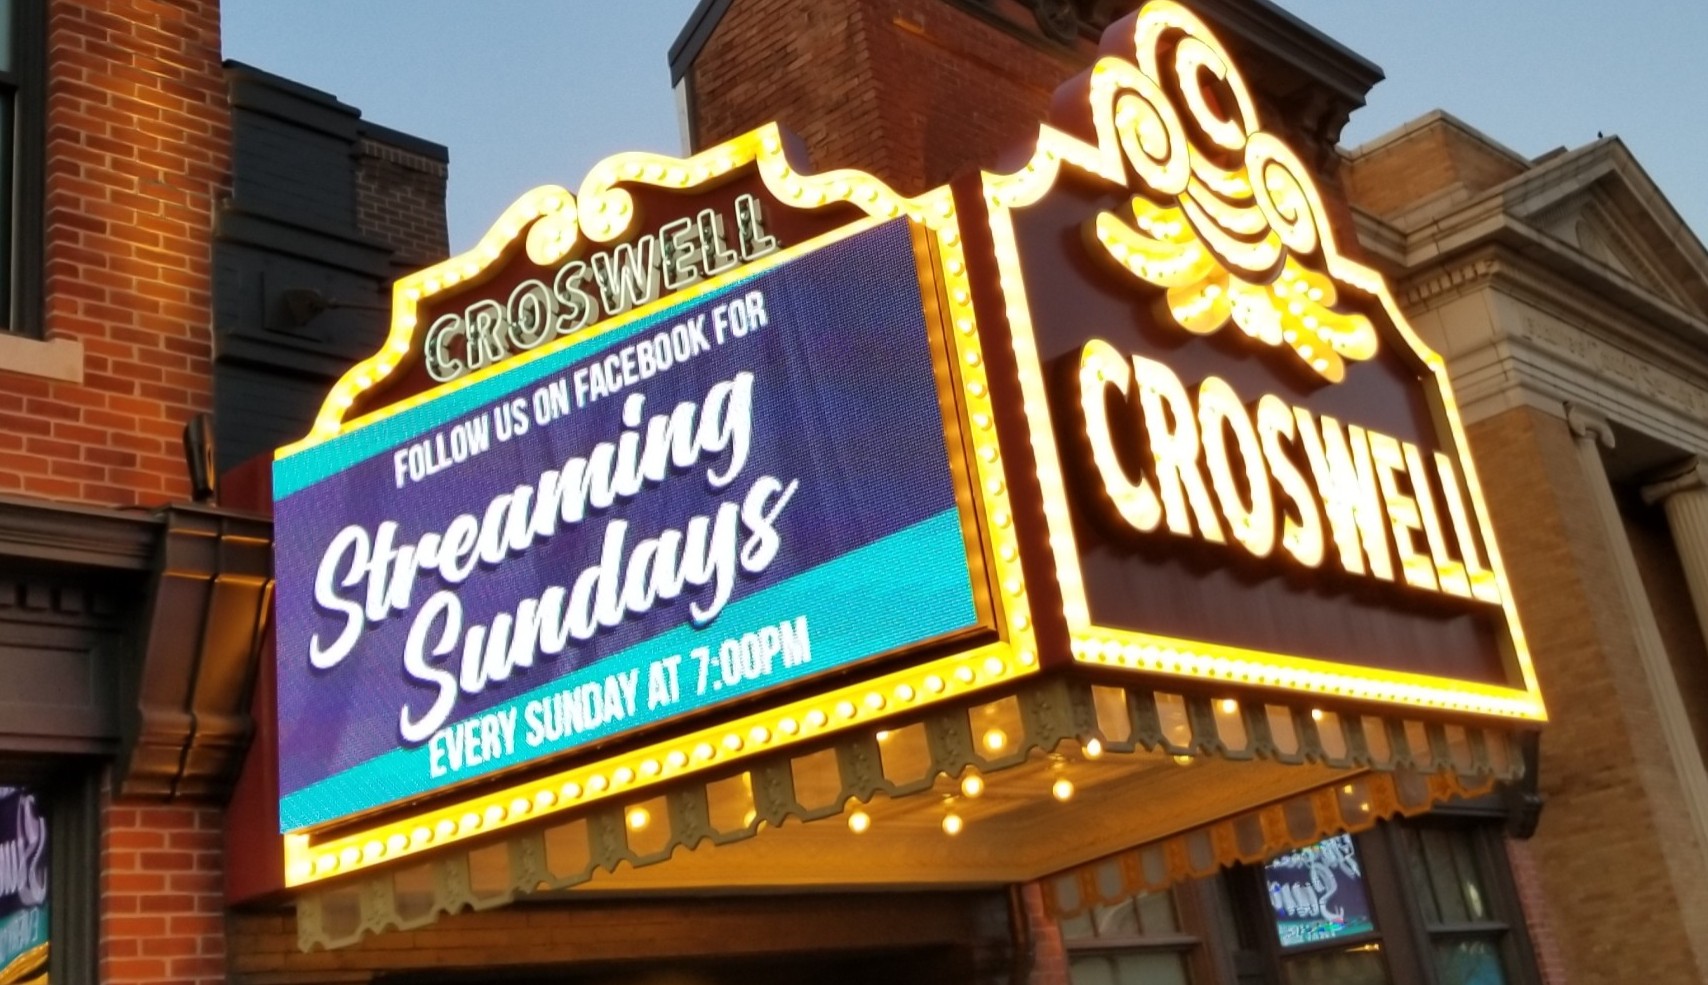 Croswell to livestream shows every Sunday on Facebook Croswell Opera